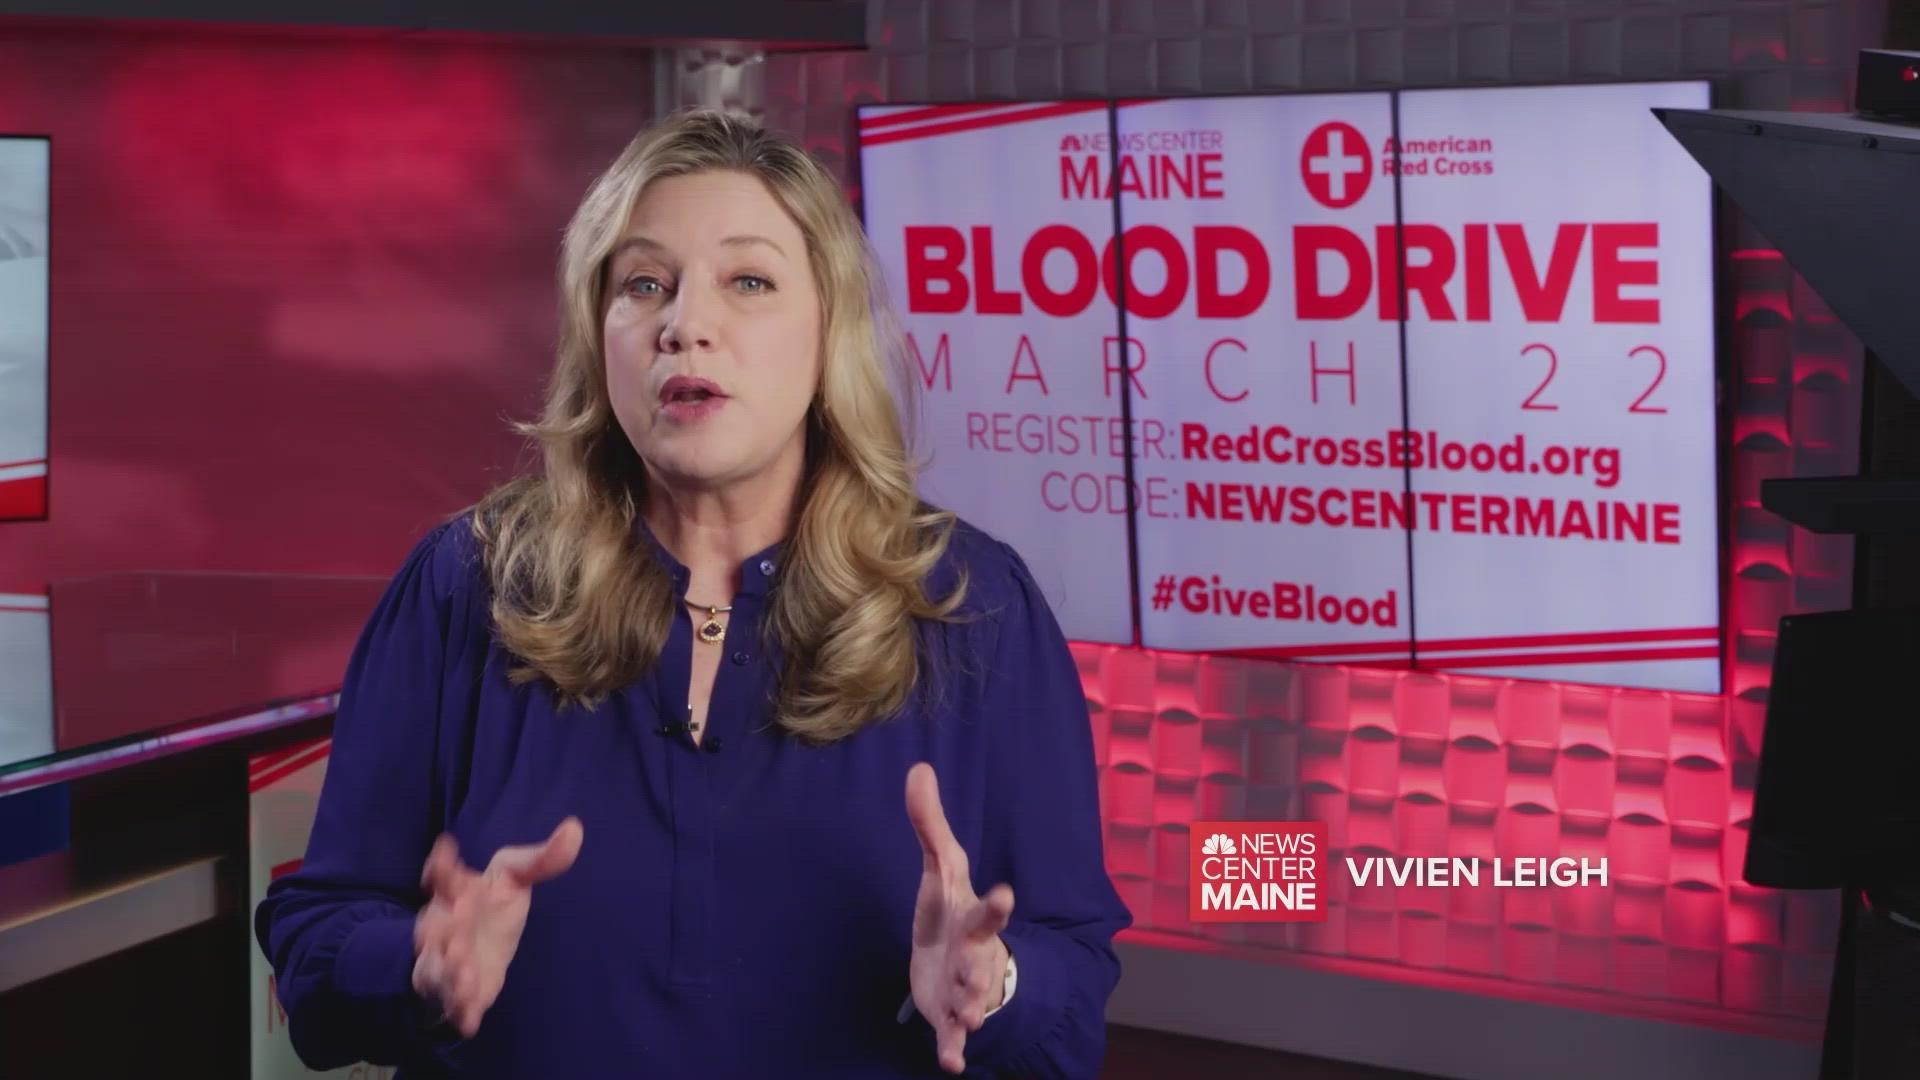 NEWS CENTER Maine is joining the Red Cross to help fellow Mainers in need. We're asking our viewers to help their neighbors by donating blood on Wednesday, March 22.